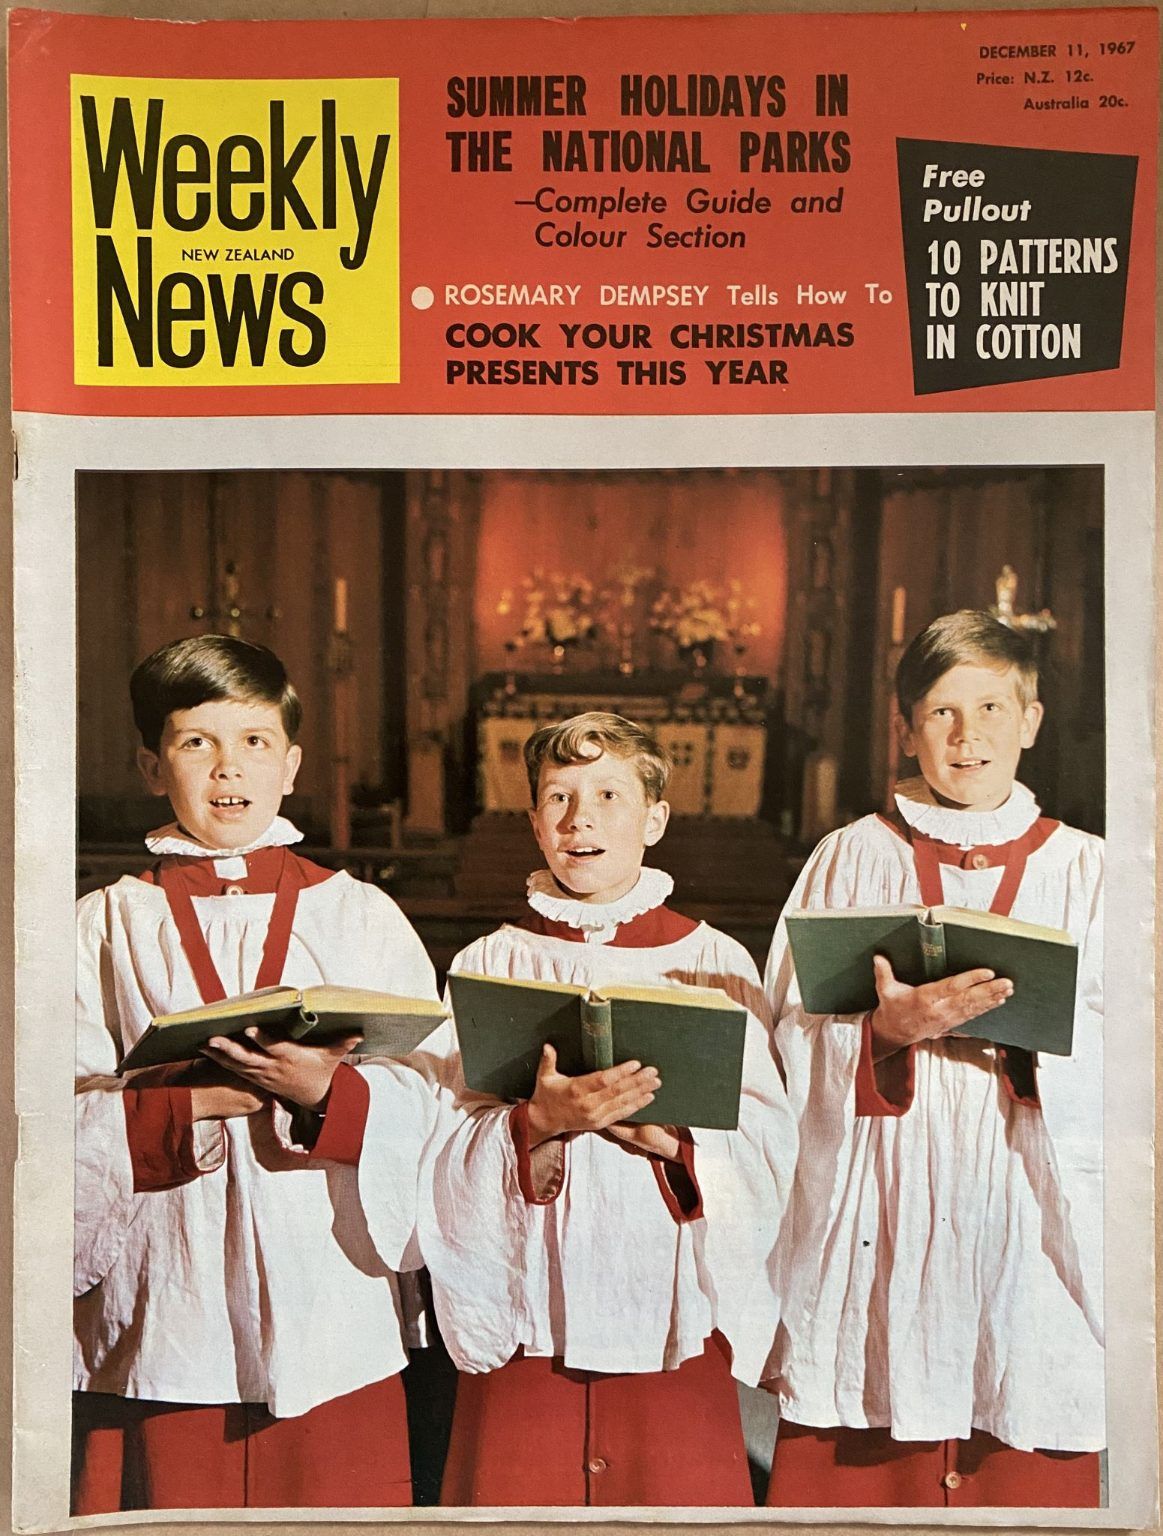 OLD NEWSPAPER: New Zealand Weekly News, No. 5428, 11 December 1967